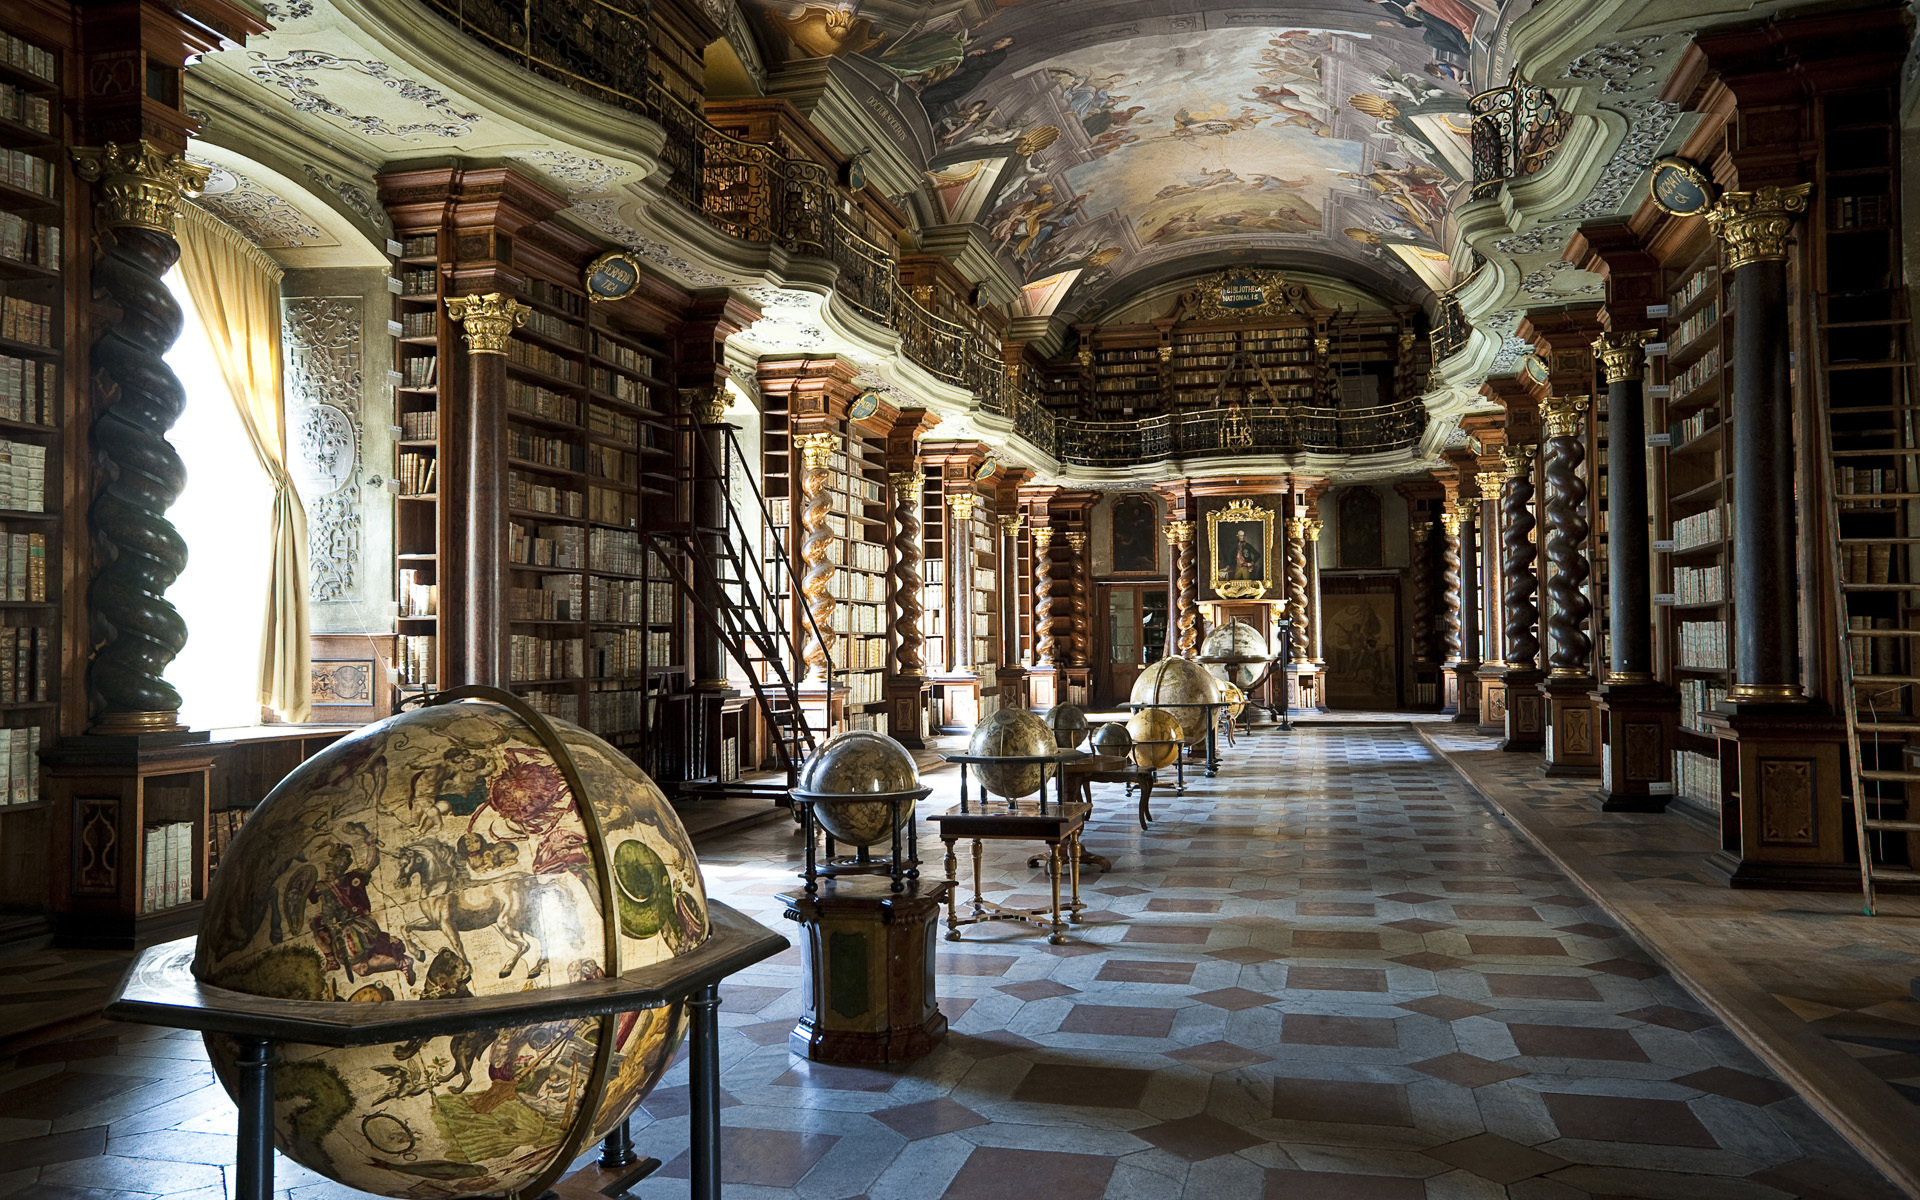 library, Books, Columns, Ceiling, Painting, Sculpture, Globes, Room, Rooms Wallpaper